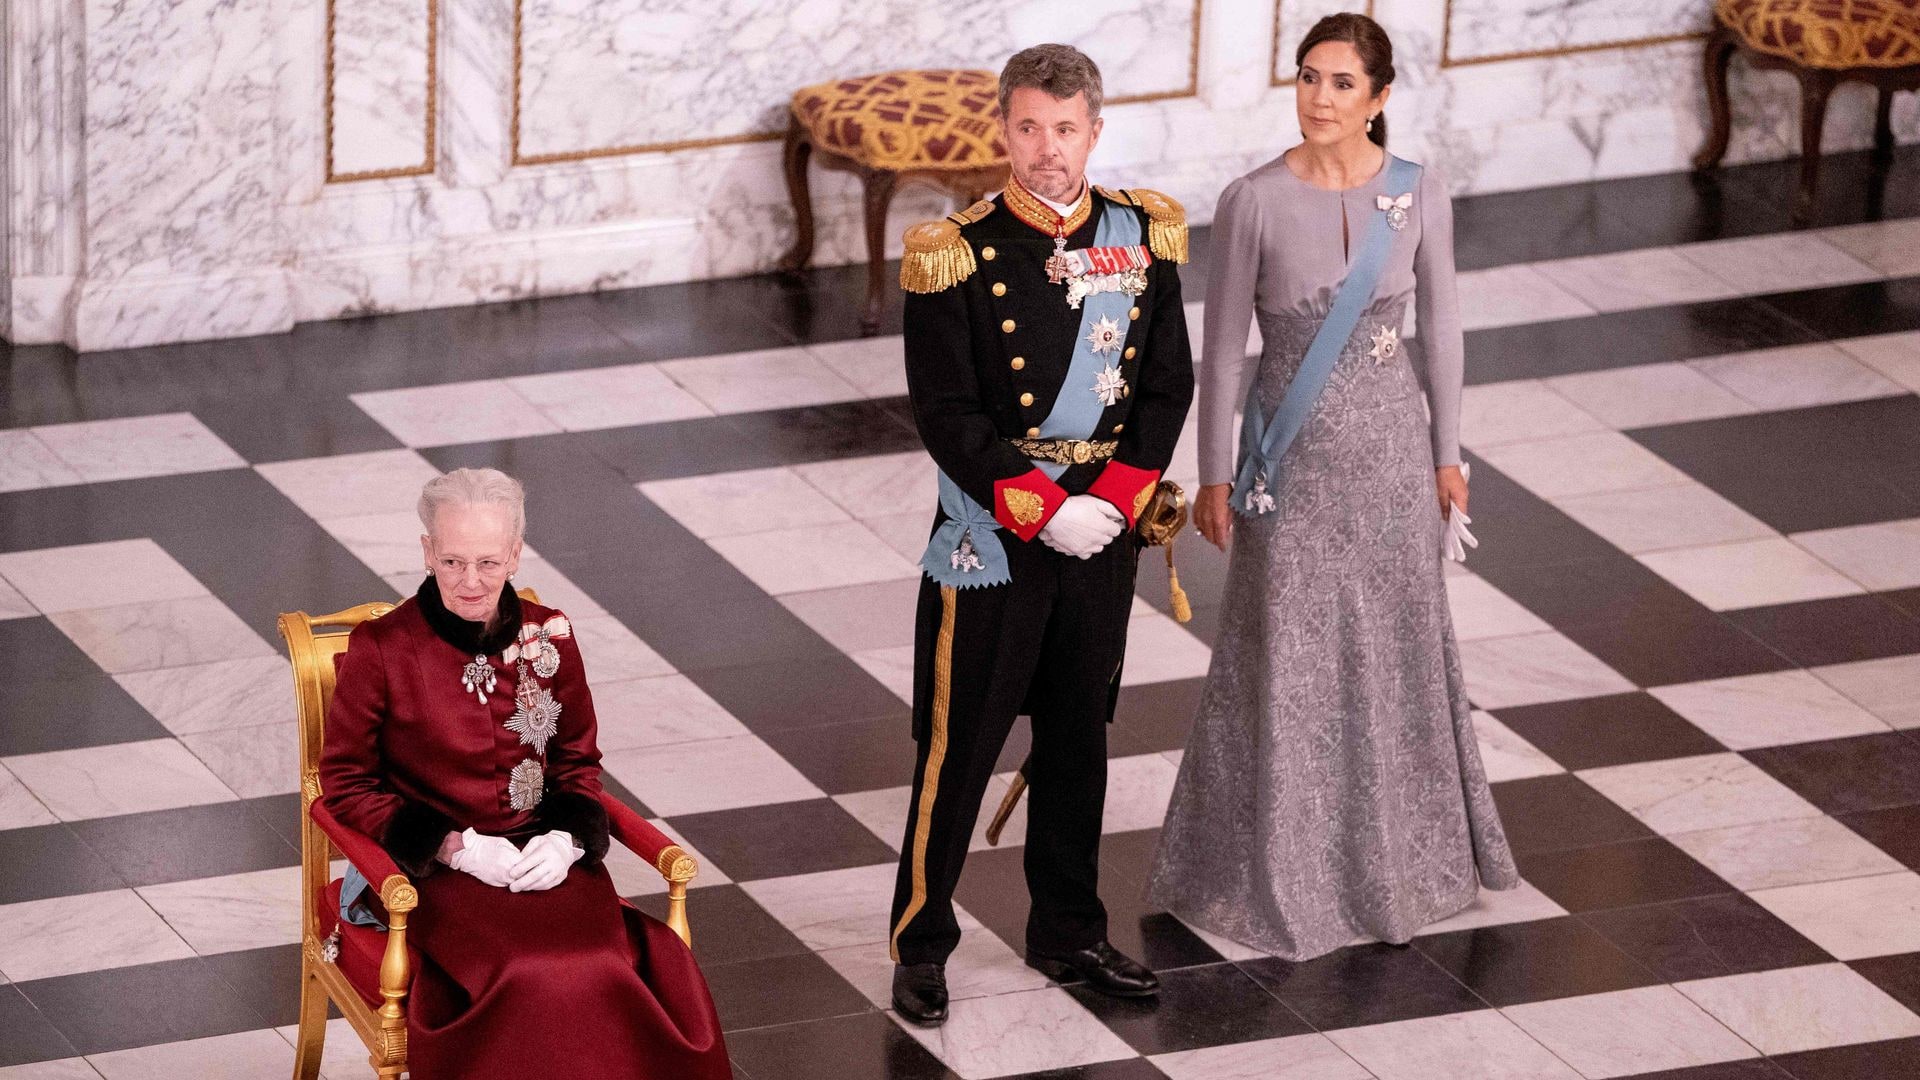 Queen Margrethe II of Denmark, Crown Prince Frederik of Denmark and Crown Princess Mary of Denmark attend the New Year's reception for the diplomatic corps at Christiansborg Palace, Copenhagen, on January 3, 2023